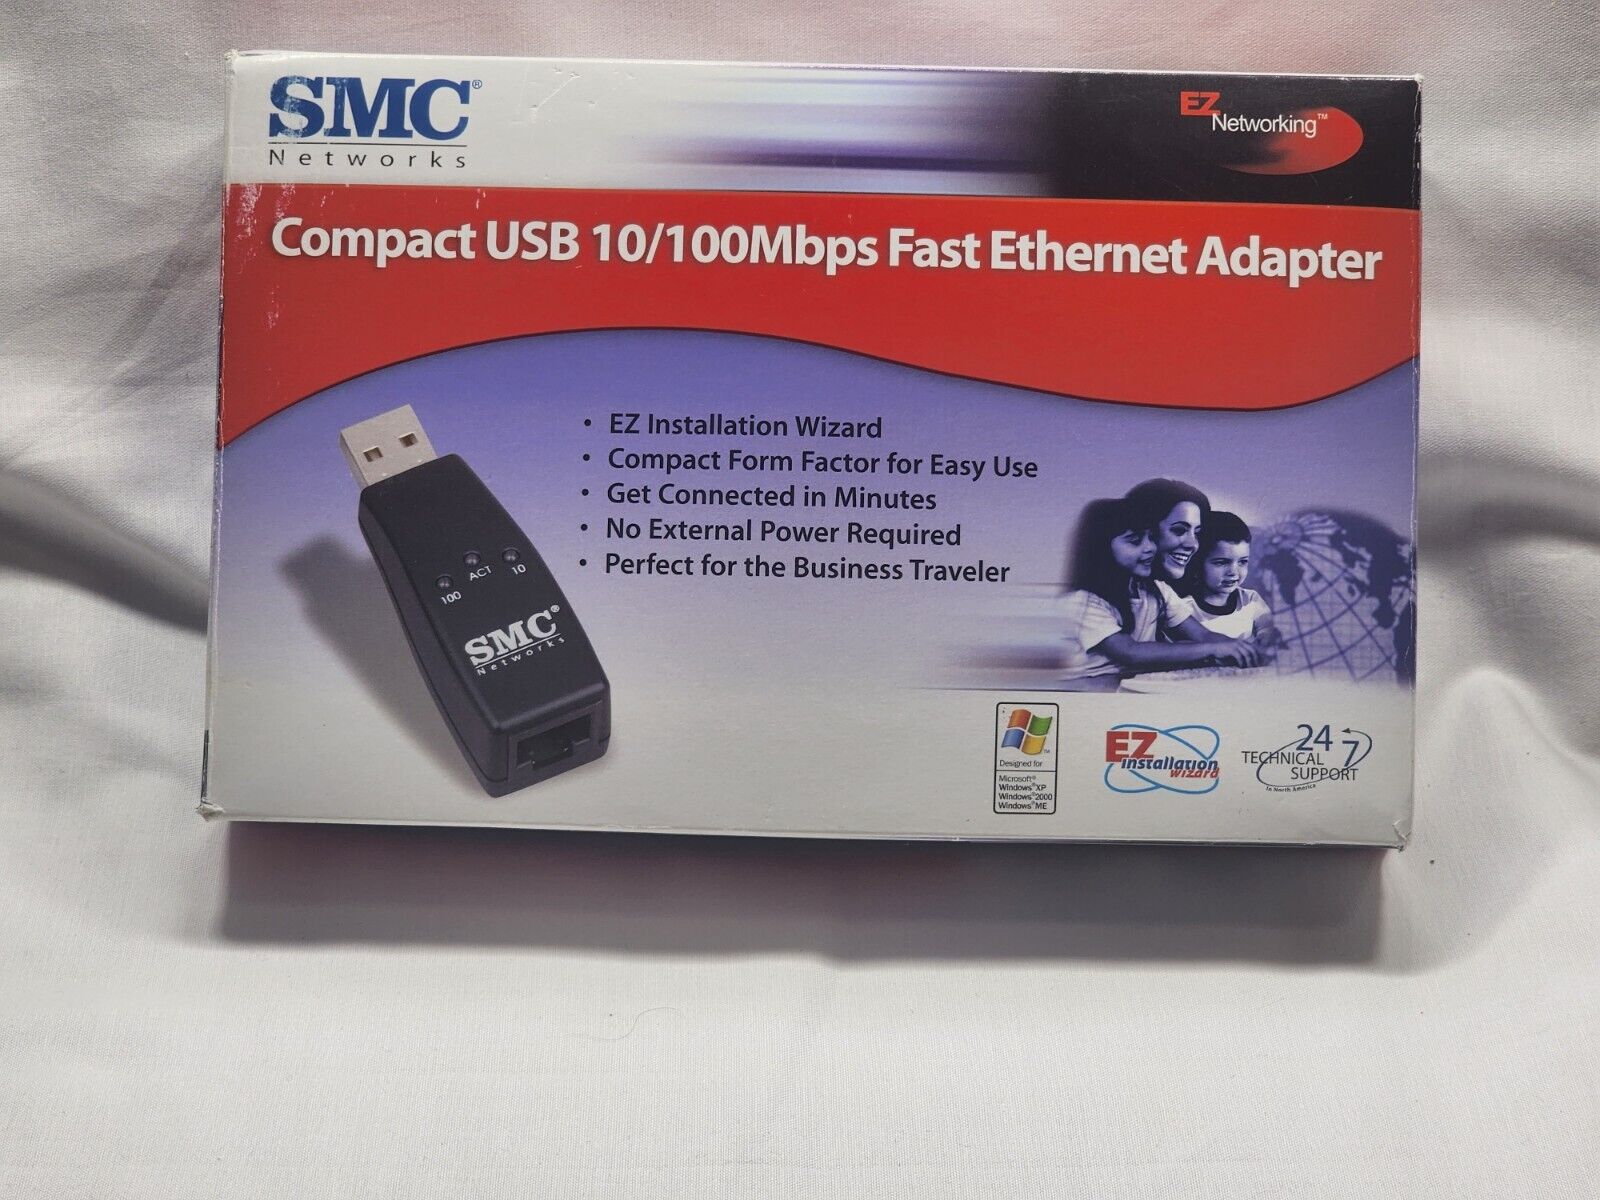 SMC Networks Compact USB 10/100Mbps Fast Ethernet Adapter